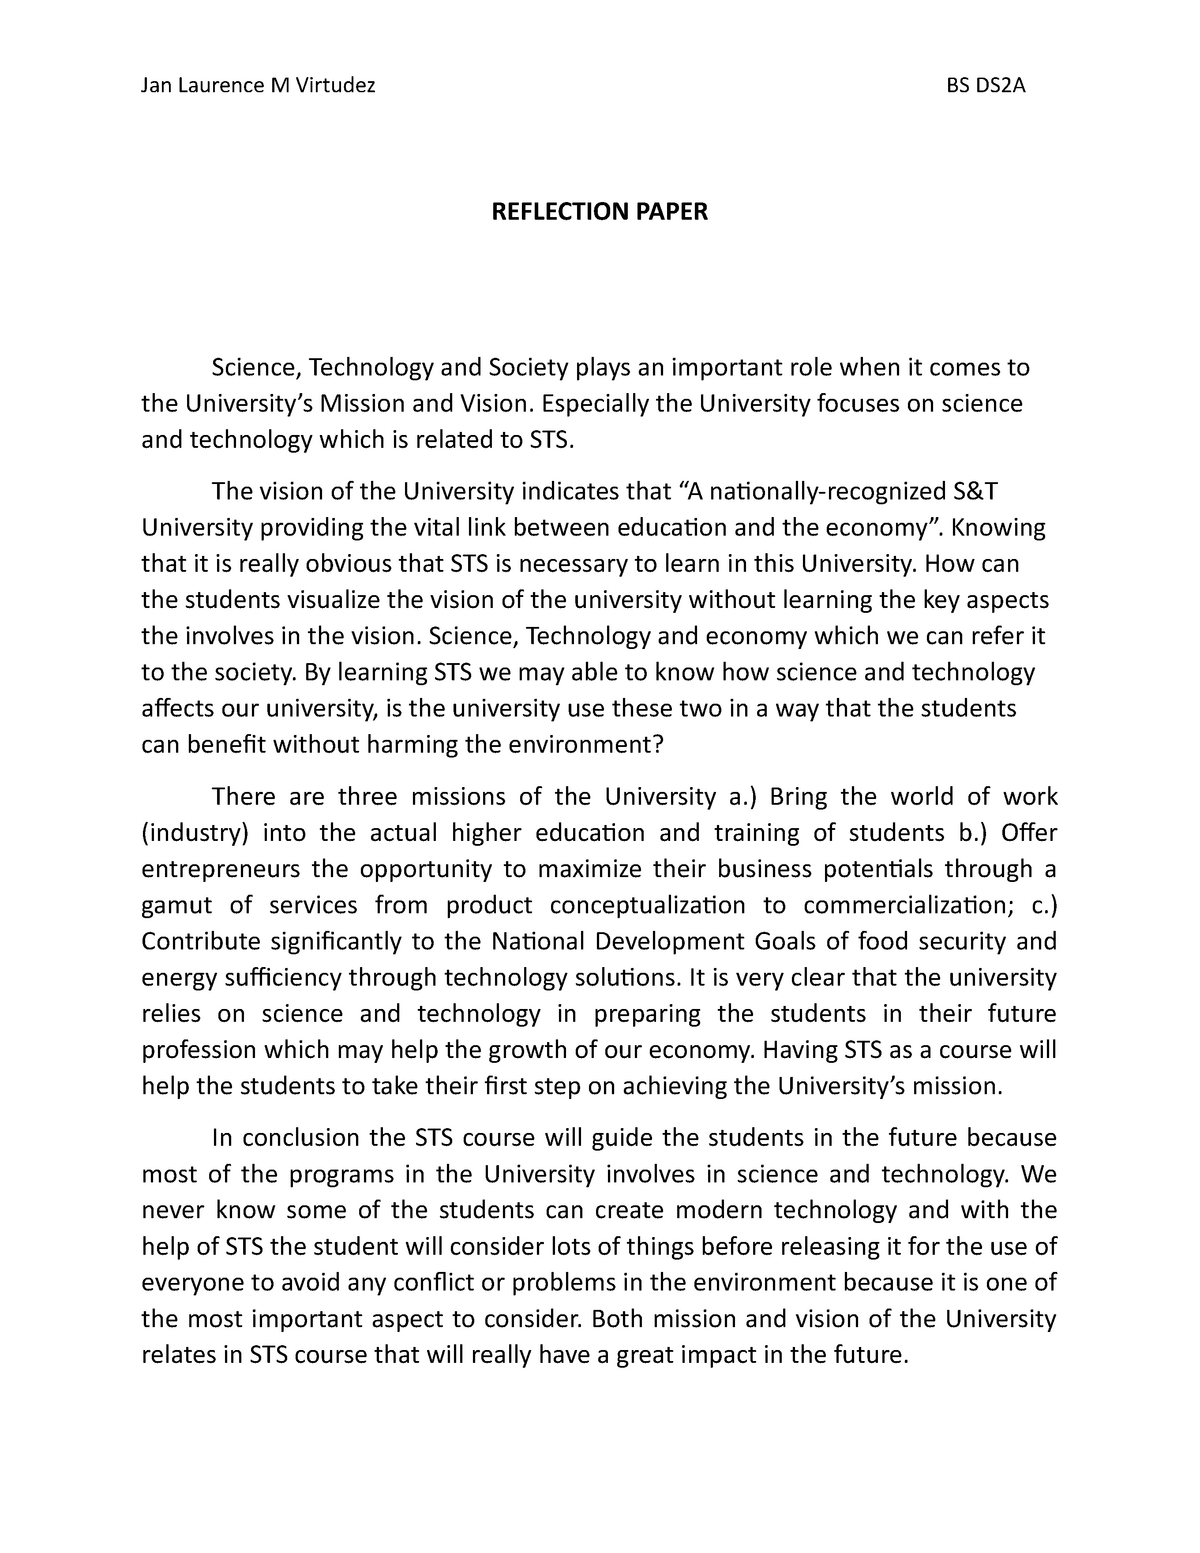 science technology and society essay